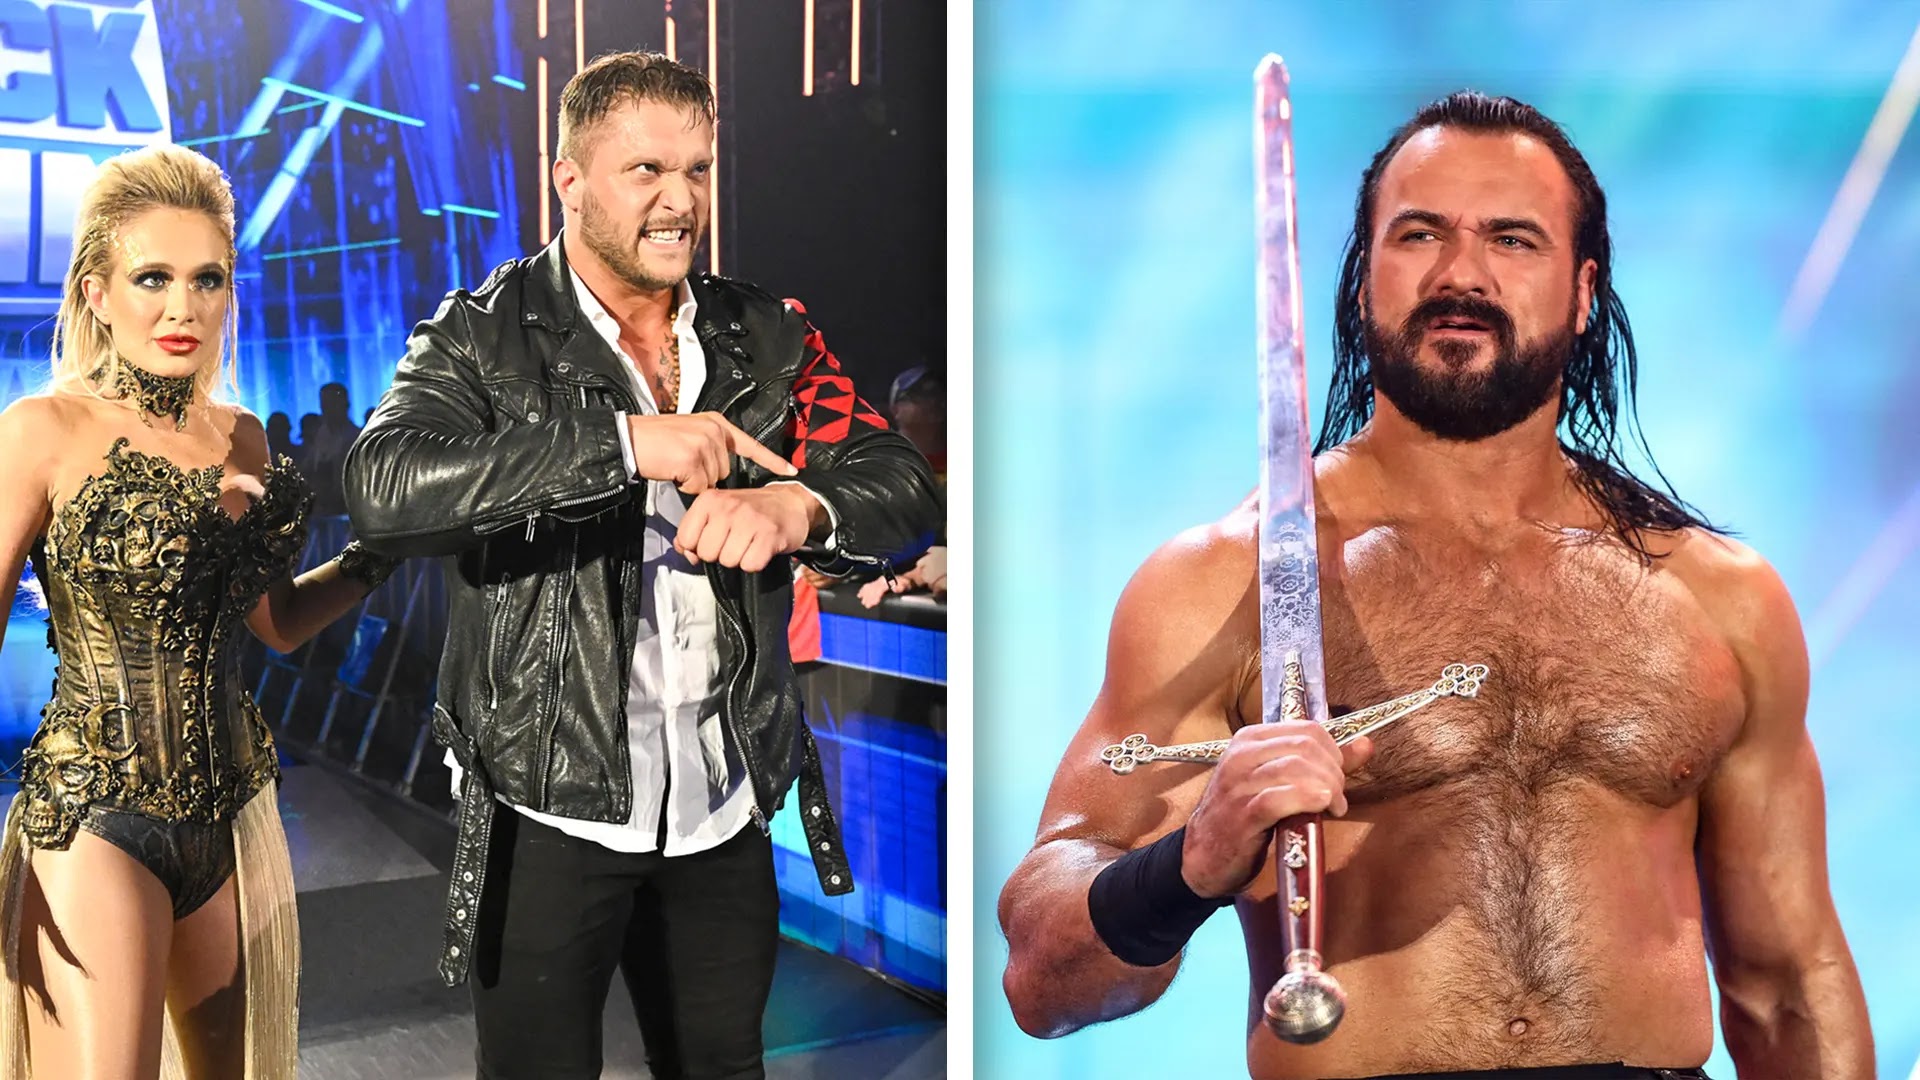 WWE Planning Stipulation Match Between McIntyre and Kross At Crown Jewel